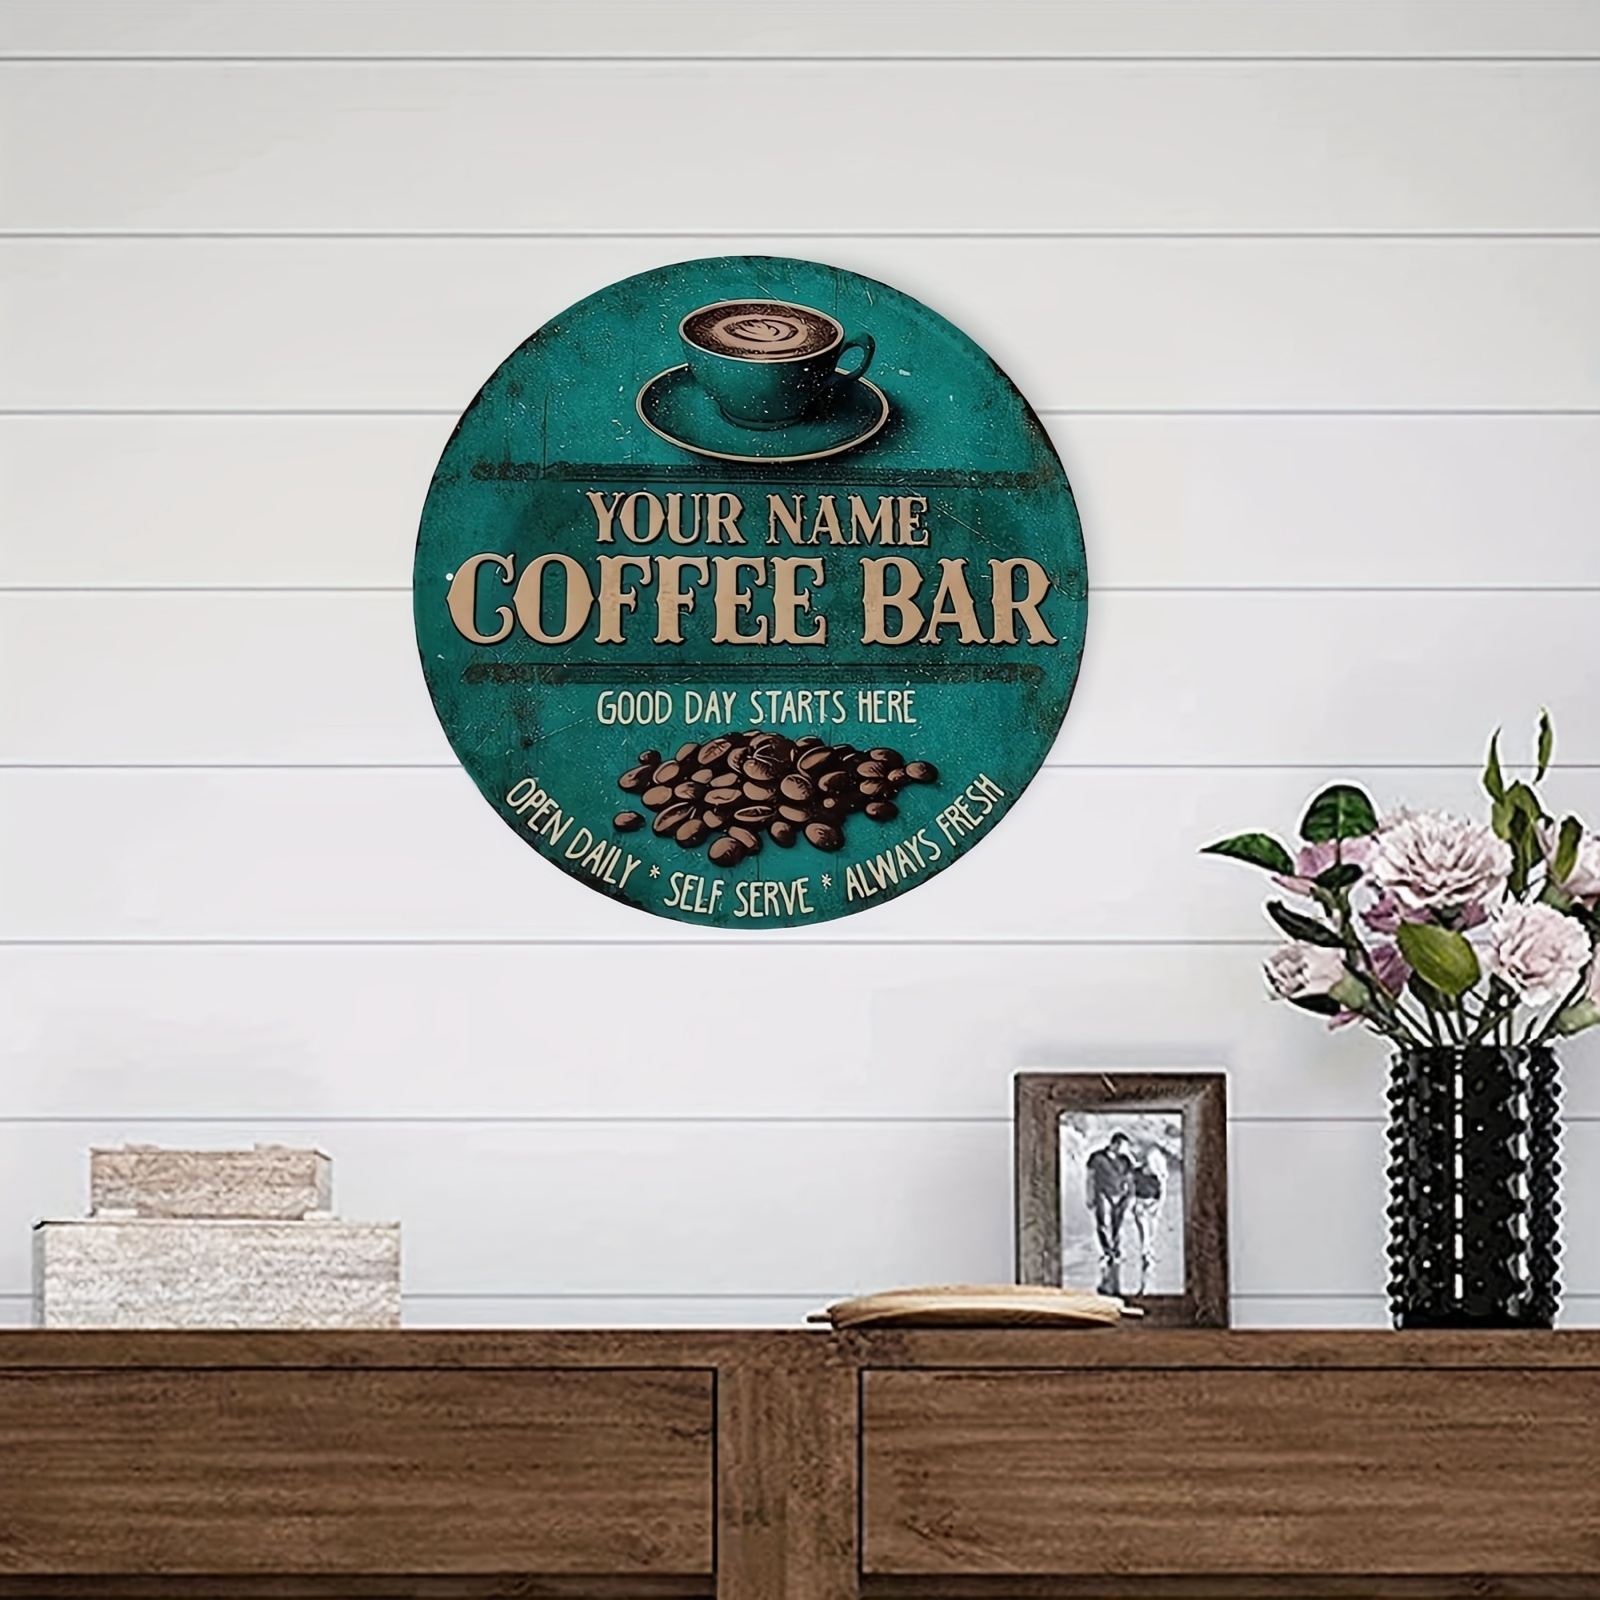 Coffee Bar Open Daily Cafe Decor Wood Hanging Plaque 5x10 Inch Coffee Signs  Modern Bar Accessories Kitchen Home Pub Shop Coffee Station Farmhouse Deco